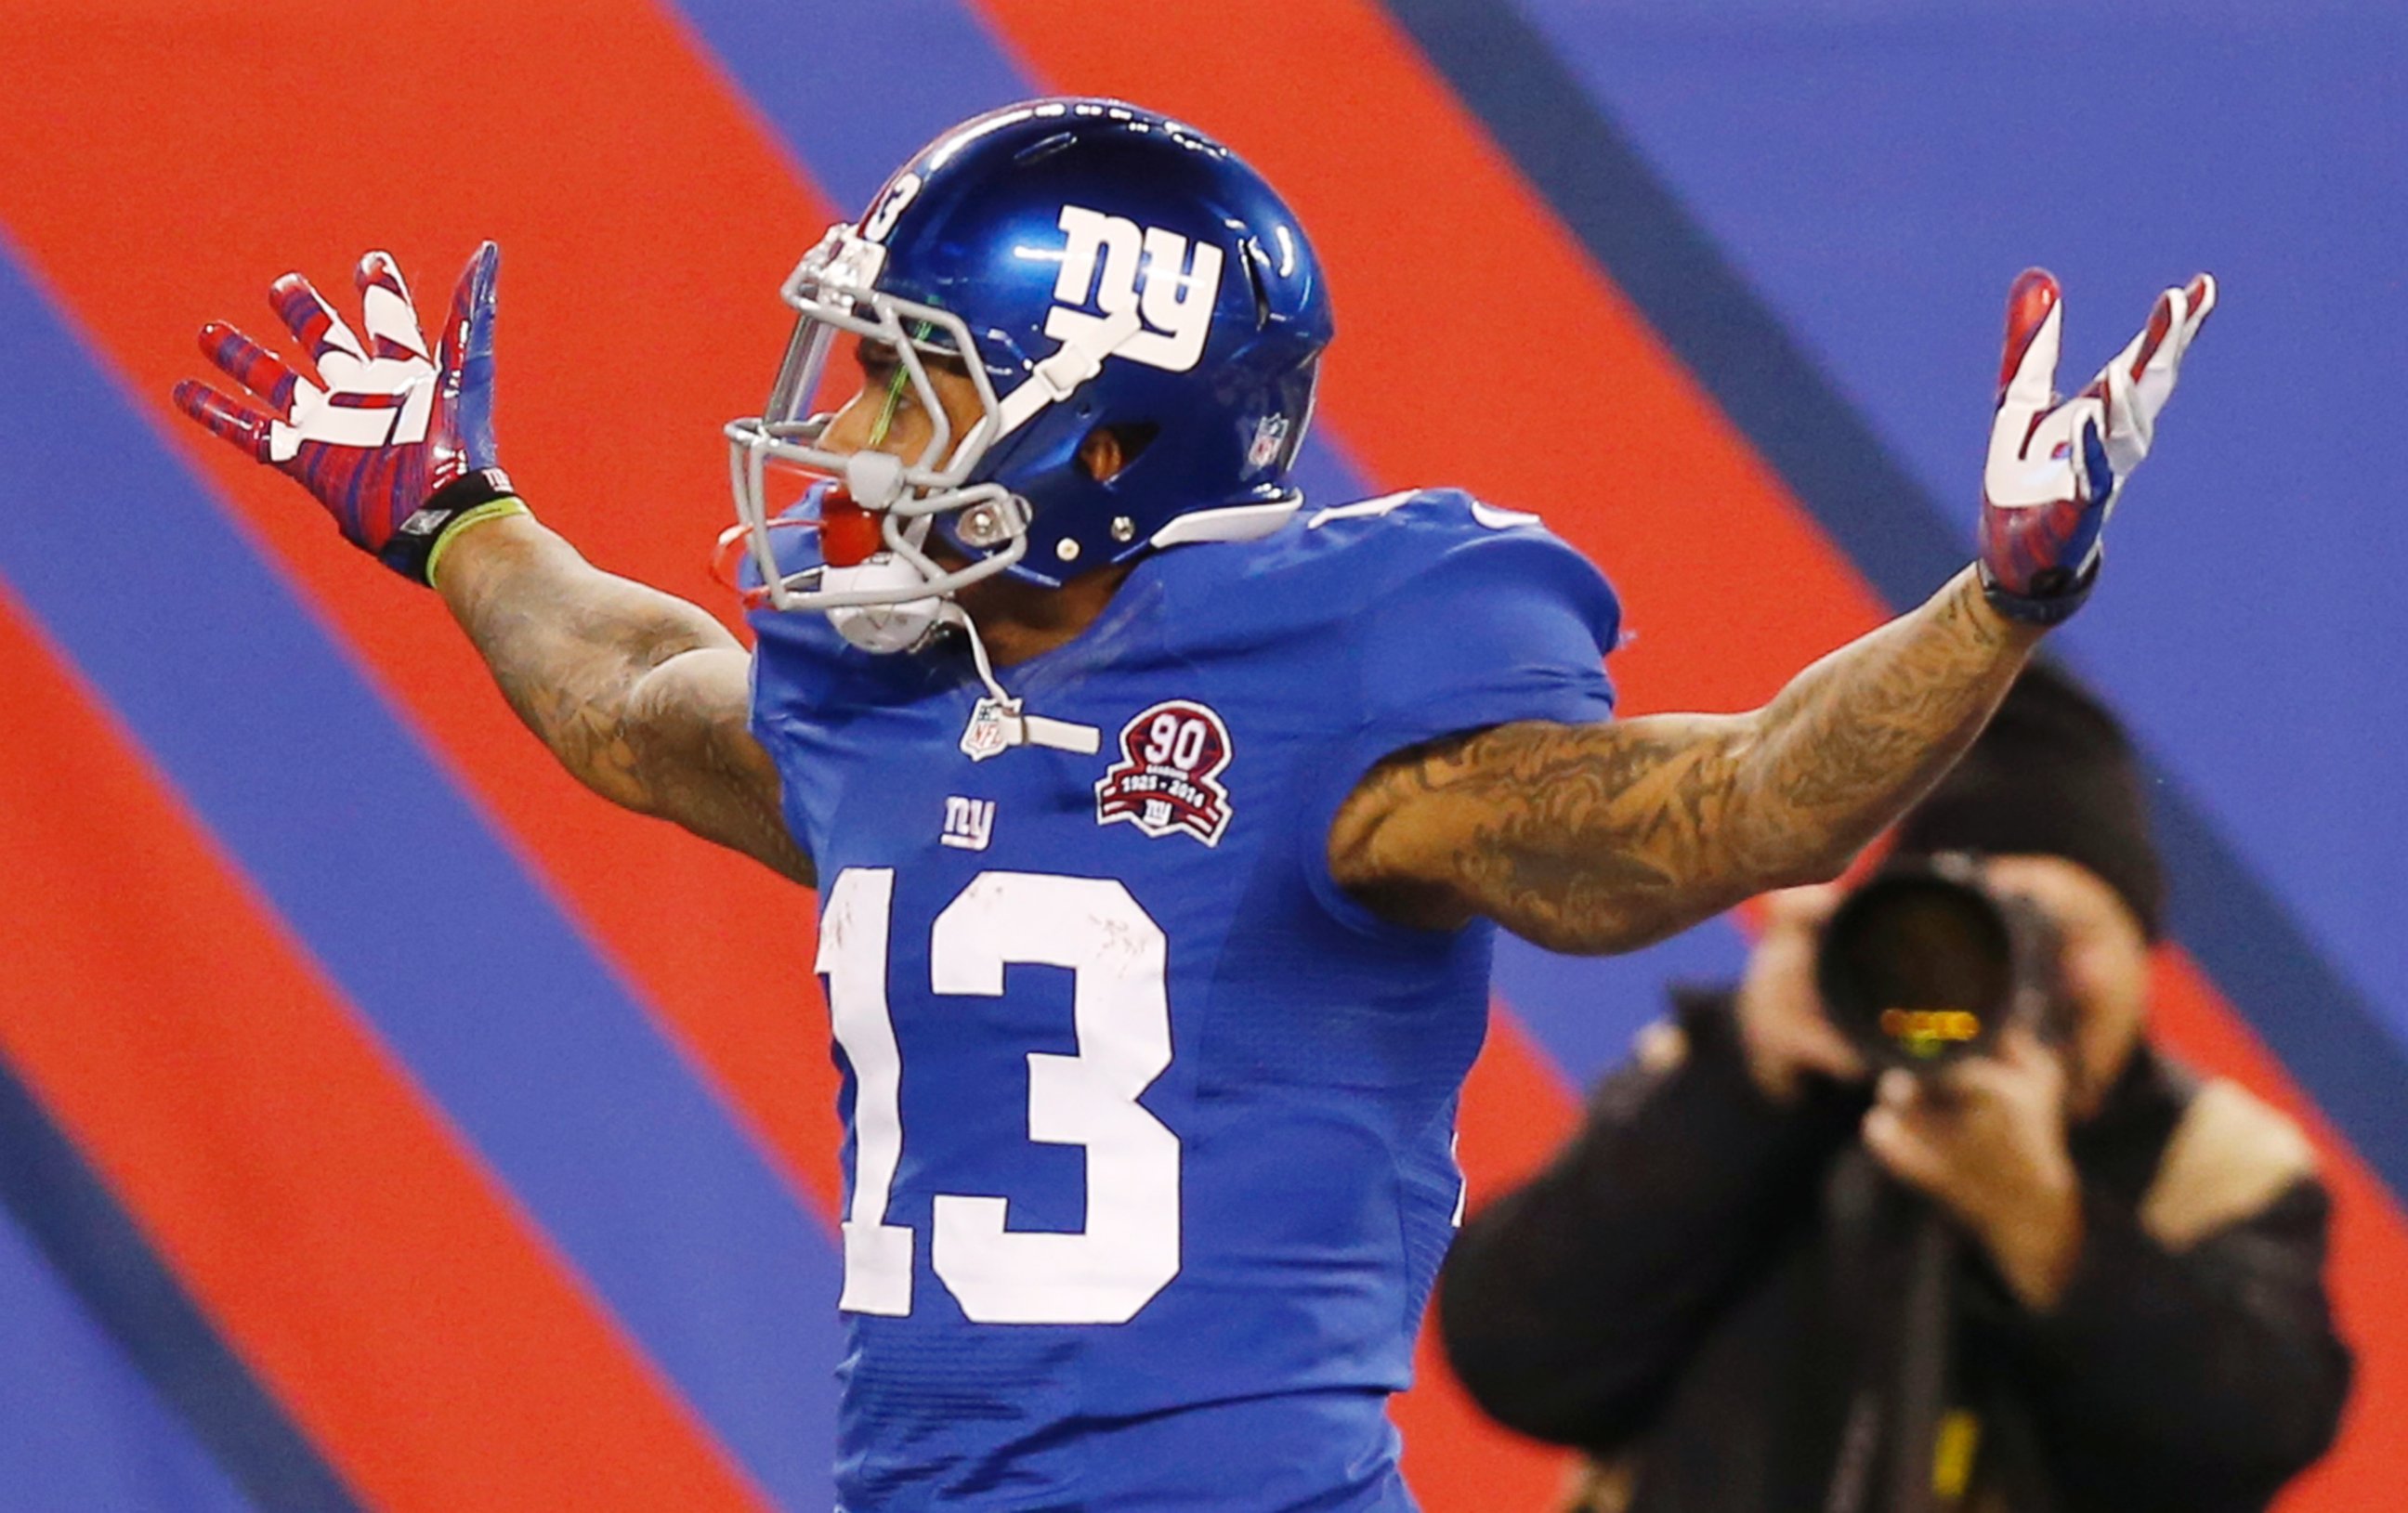 PHOTO: New York Giants wide receiver Odell Beckham Jr. reacts after making a one-handed catch for a touchdown against the Dallas Cowboys in the first quarter of an NFL football game, Nov. 23, 2014, in East Rutherford, N.J.